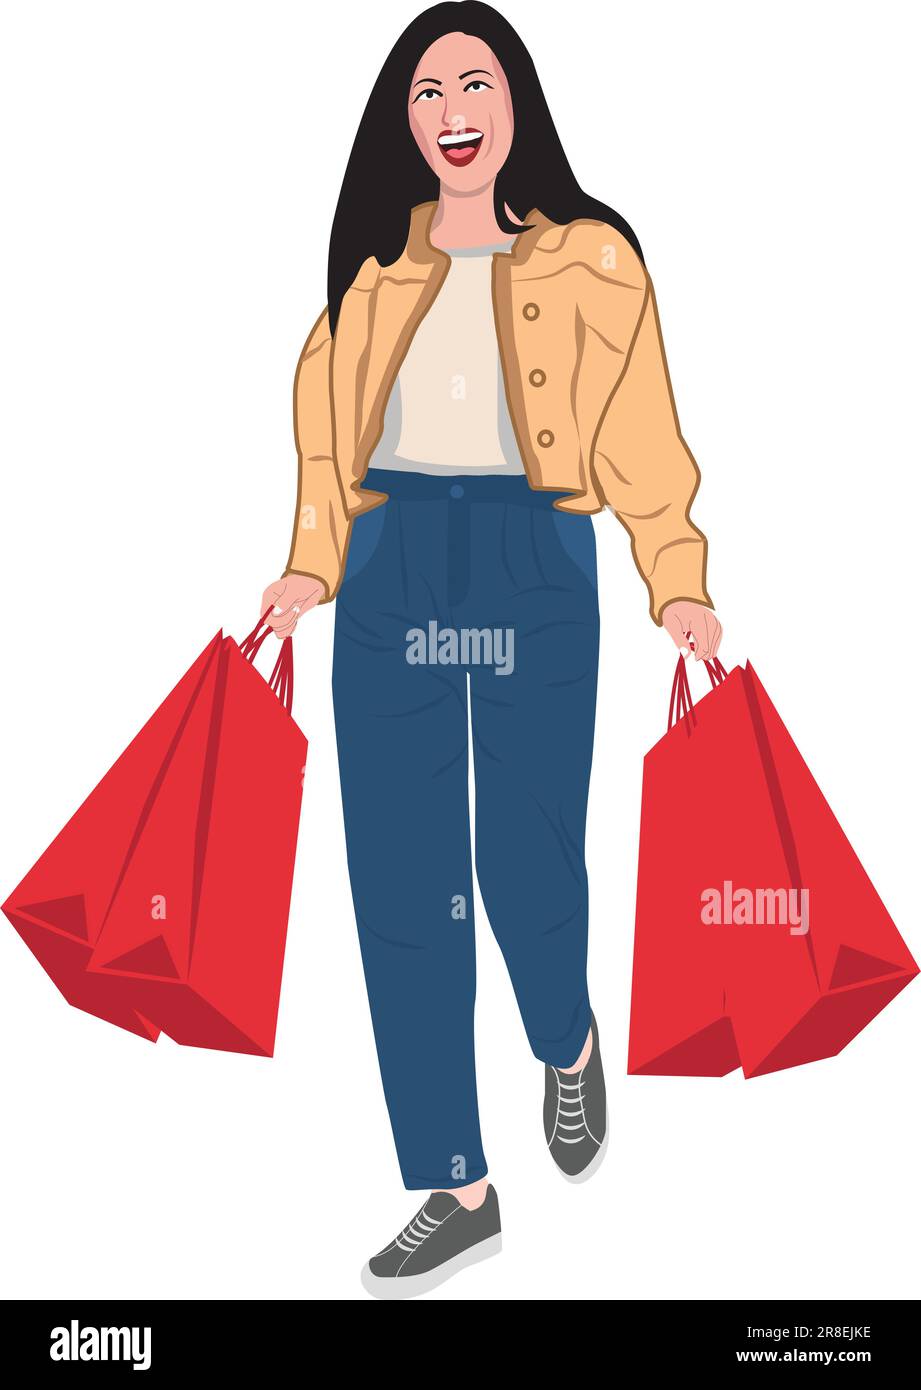 Fashionable woman holding red shopping bag, smiling cheerfully on white background. Stock Vector